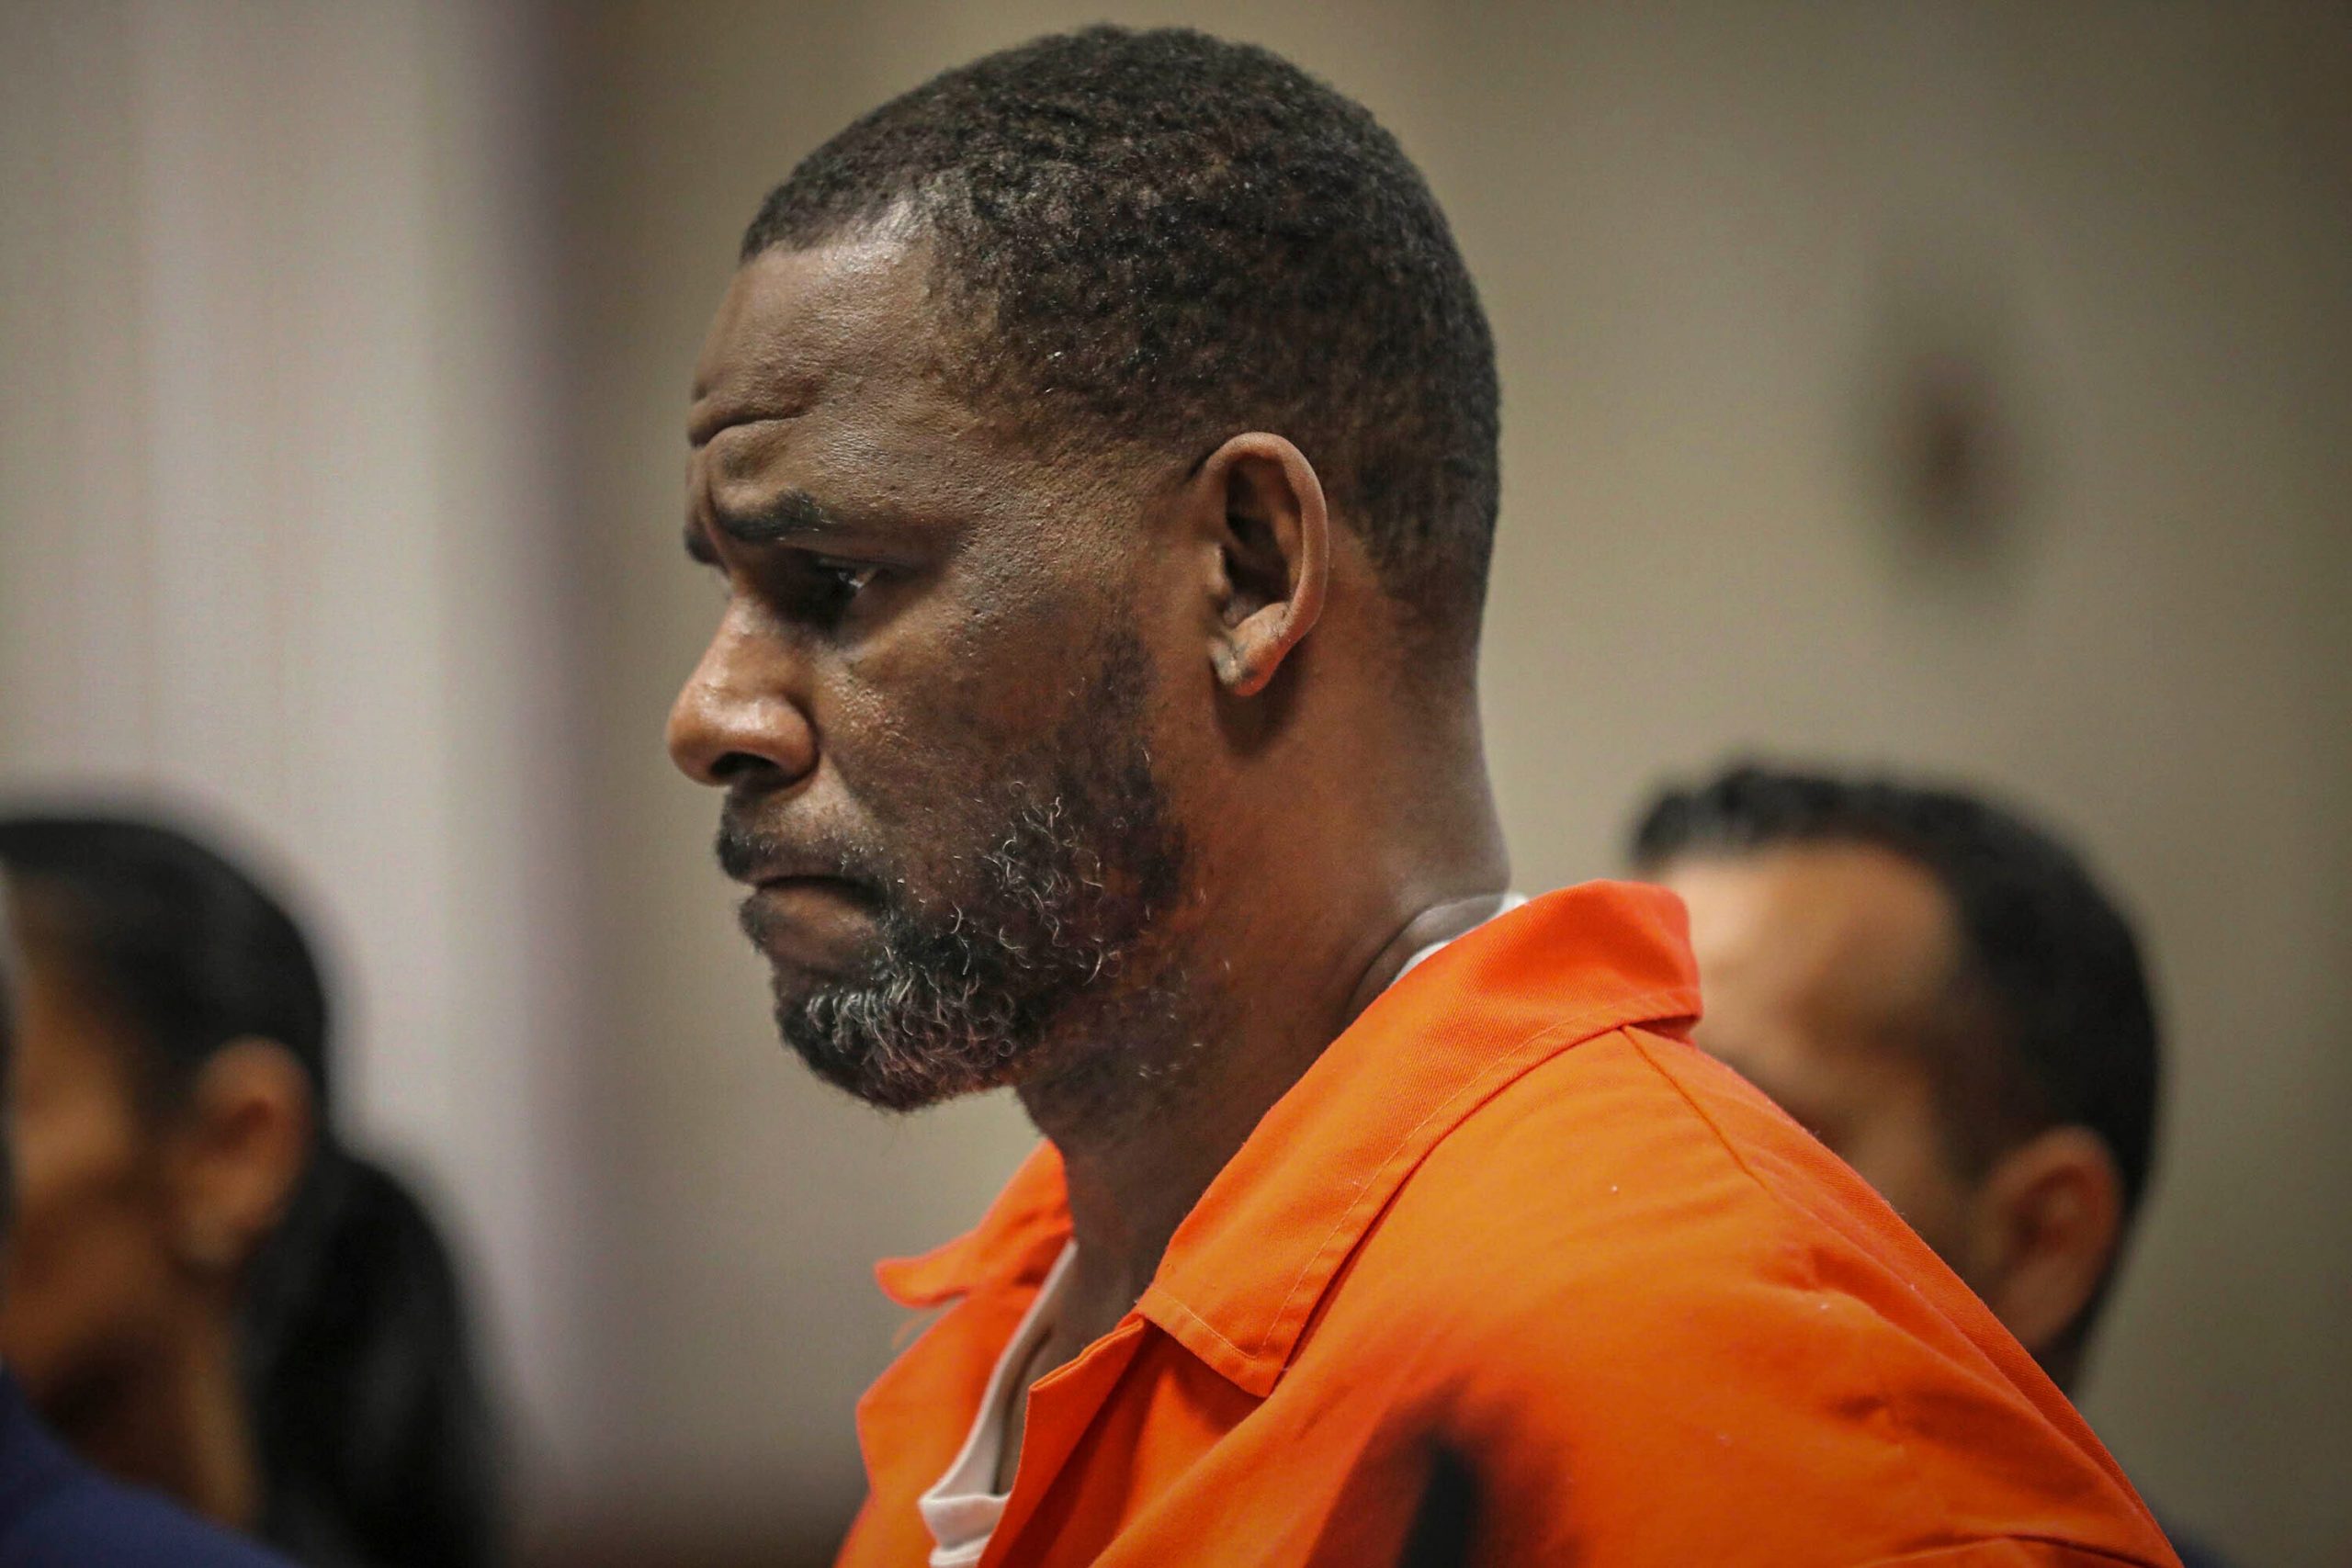 R. Kelly appears in court in Chicago in 2019.